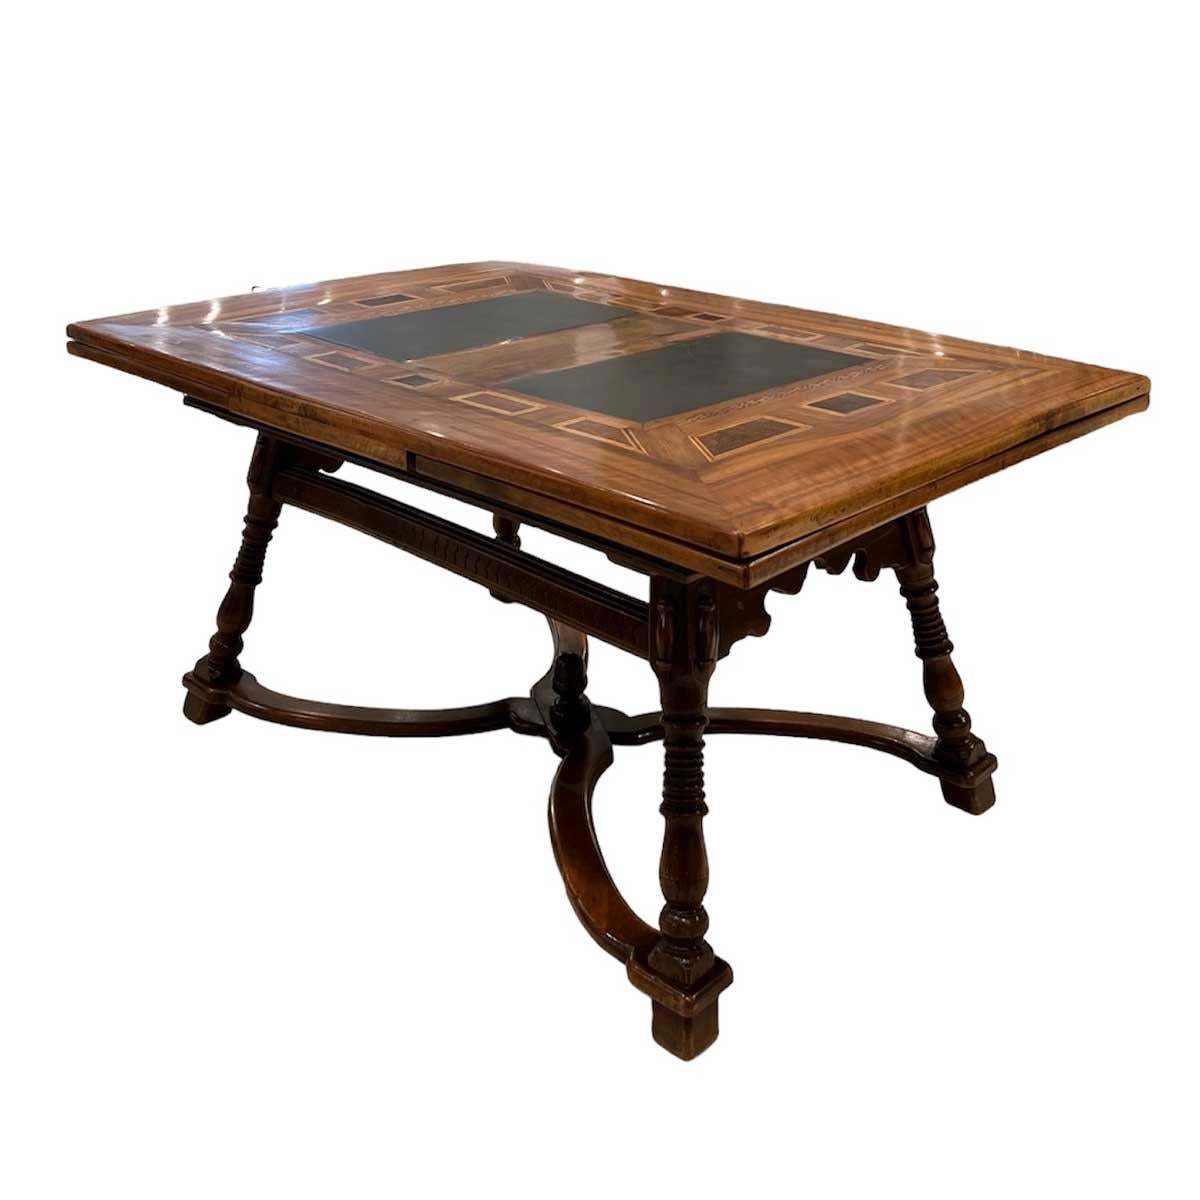 Mahogany Table with Slate Insets